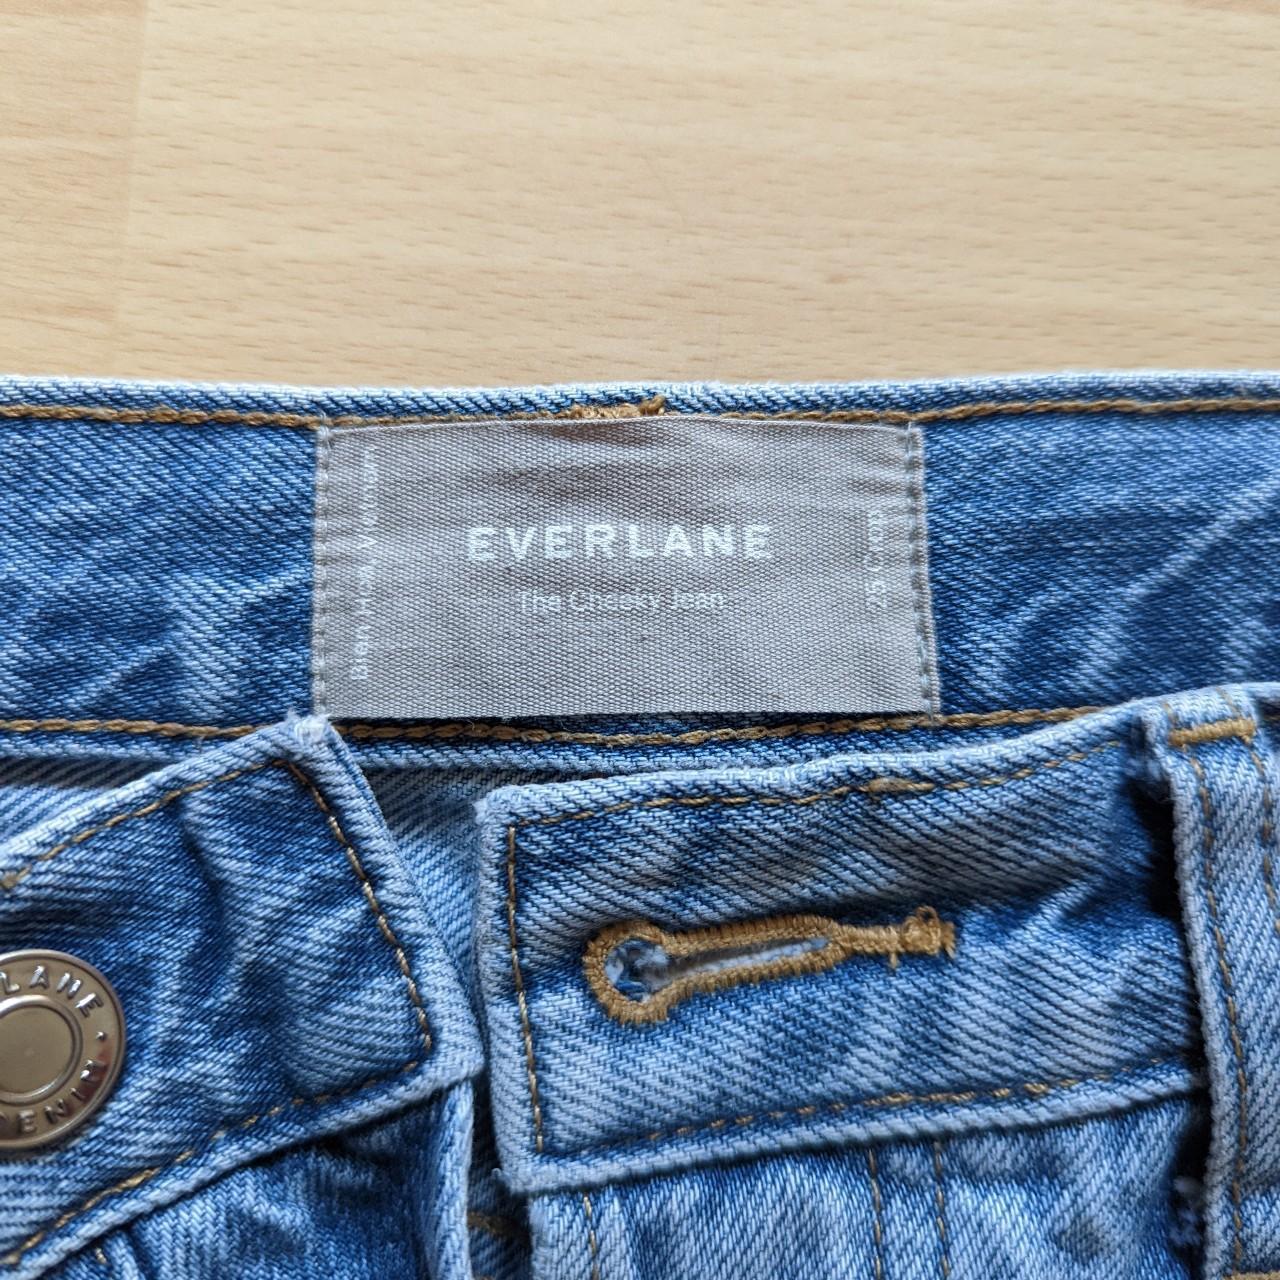 Everlane The ’90s Cheeky Jean Size 25 cropped, ideal... - Depop